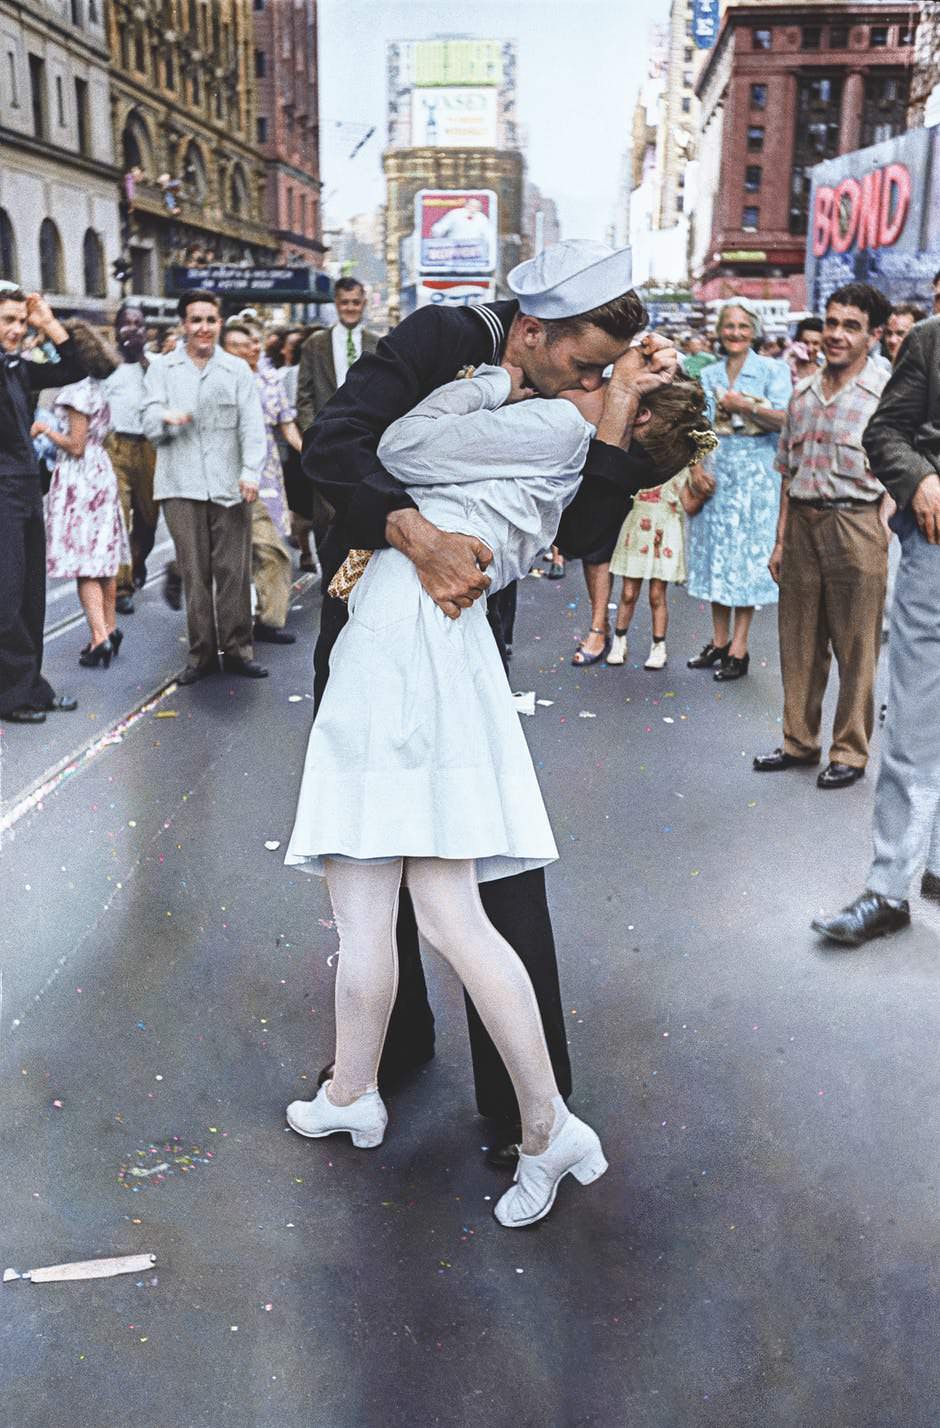 "VJ Day"
On August 14, 1945 Manhattan was in ecstasy. The crowds celebrated the "Victory over Japan Day" in the streets of the city, the capitulation of Japan. Among them was the photographer Alfred Eisenstaedt. He discovered a sailor who cockily grabbed "every girl in sight". So Eisenstaedt ran after this sailor and photographed how he wrapped his arms around a nurse in New York's Times Square and kissed uncontrollably while she was still clutching her purse.

A week later, the photo was published in Life Magazine and thus a symbol of joy over the end of the war. The names of the two participants remained unknown.